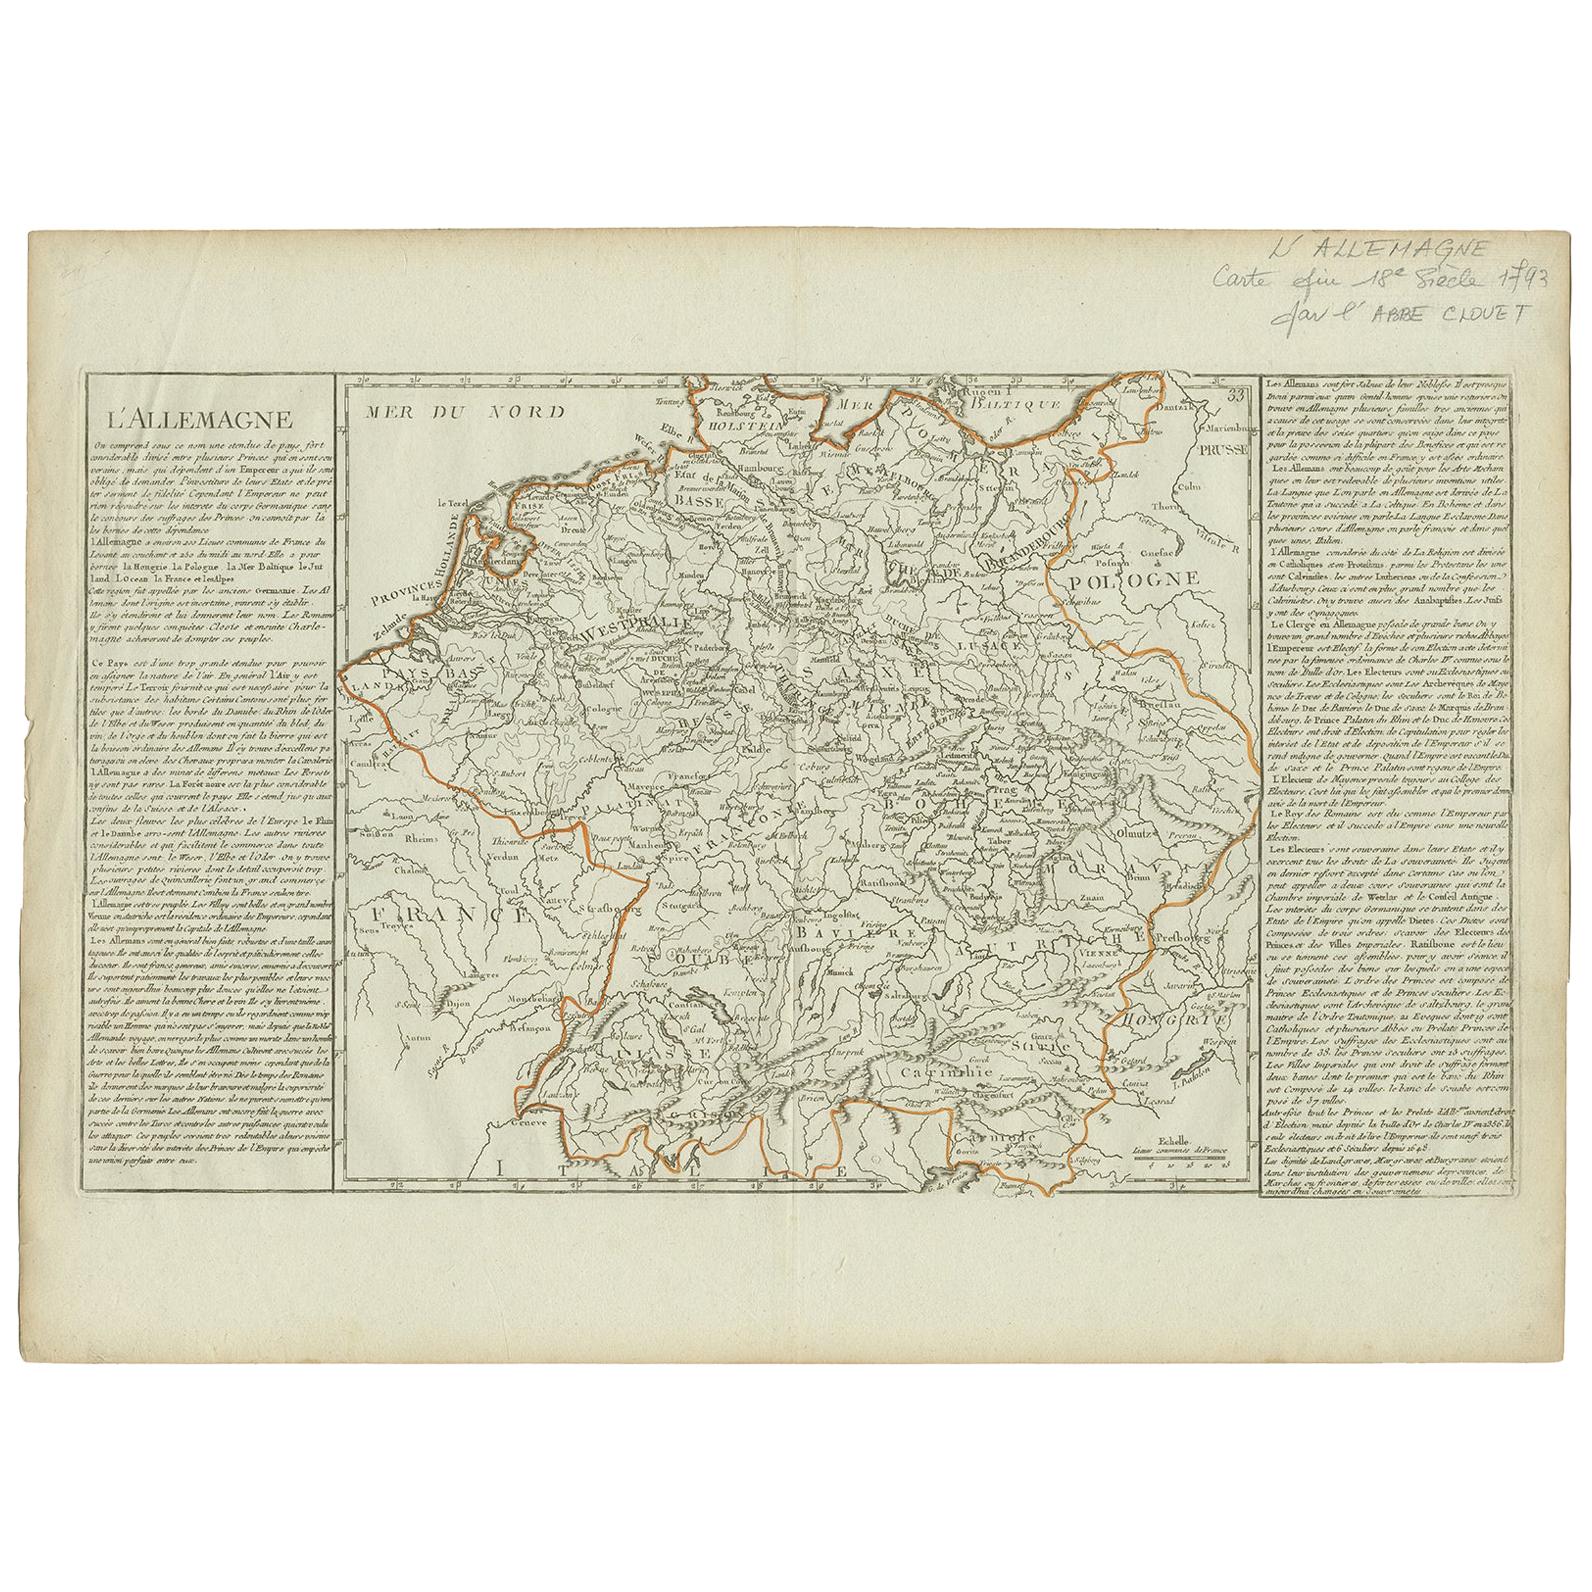 Antique Map of Germany by Clouet, 1787